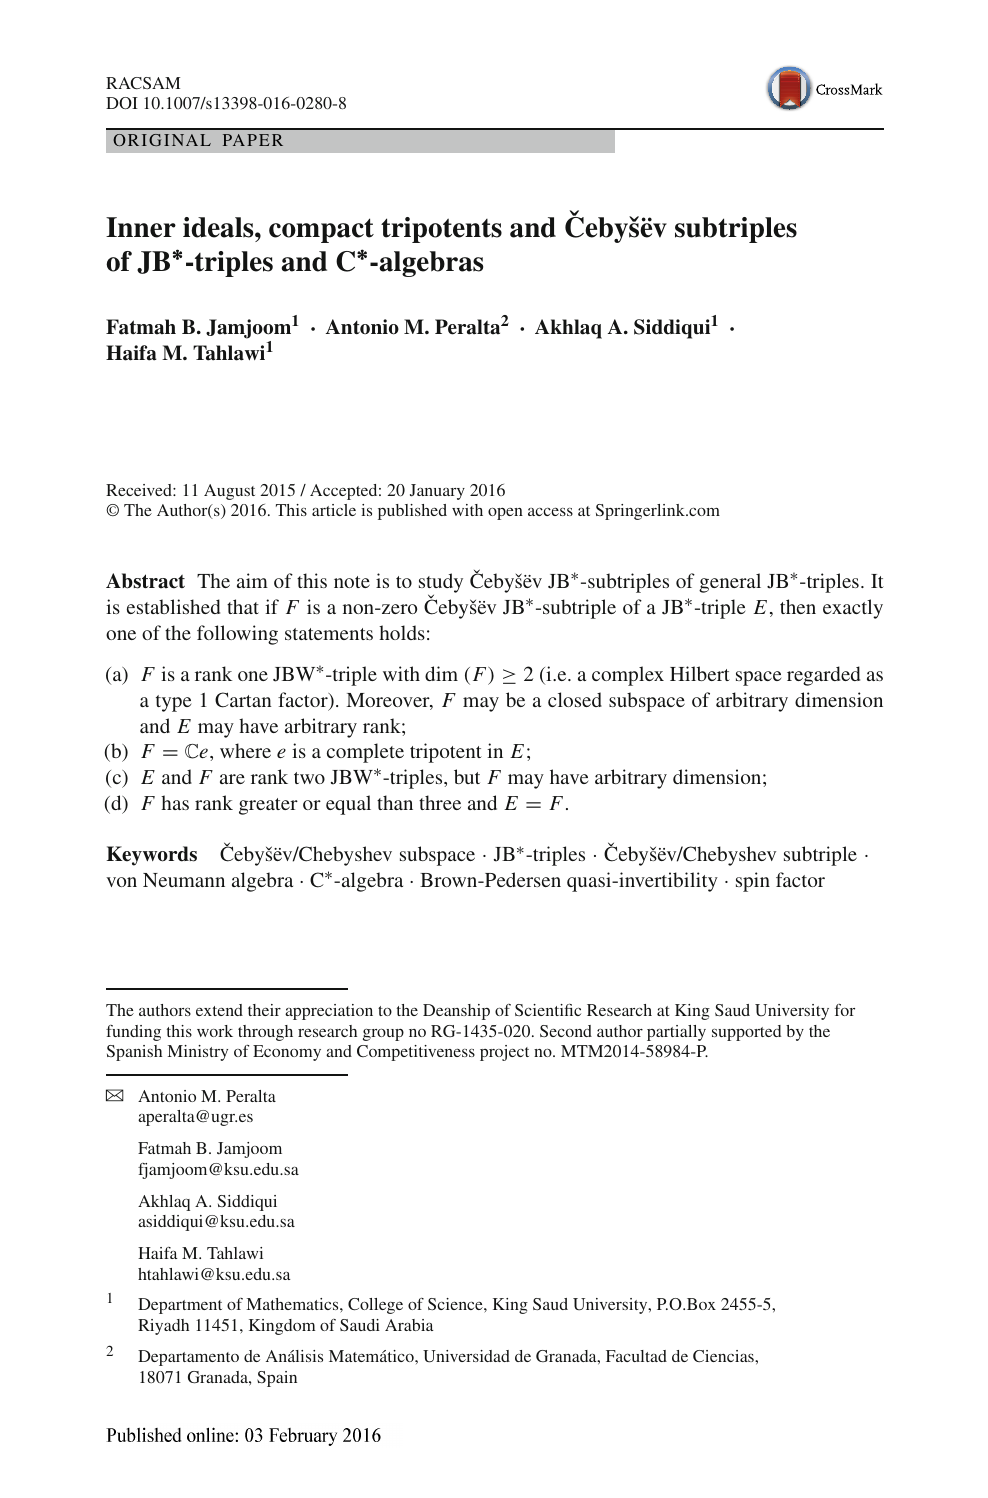 Inner Ideals Compact Tripotents And Cebysev Subtriples Of Jb Triples And C Algebras Topic Of Research Paper In Mathematics Download Scholarly Article Pdf And Read For Free